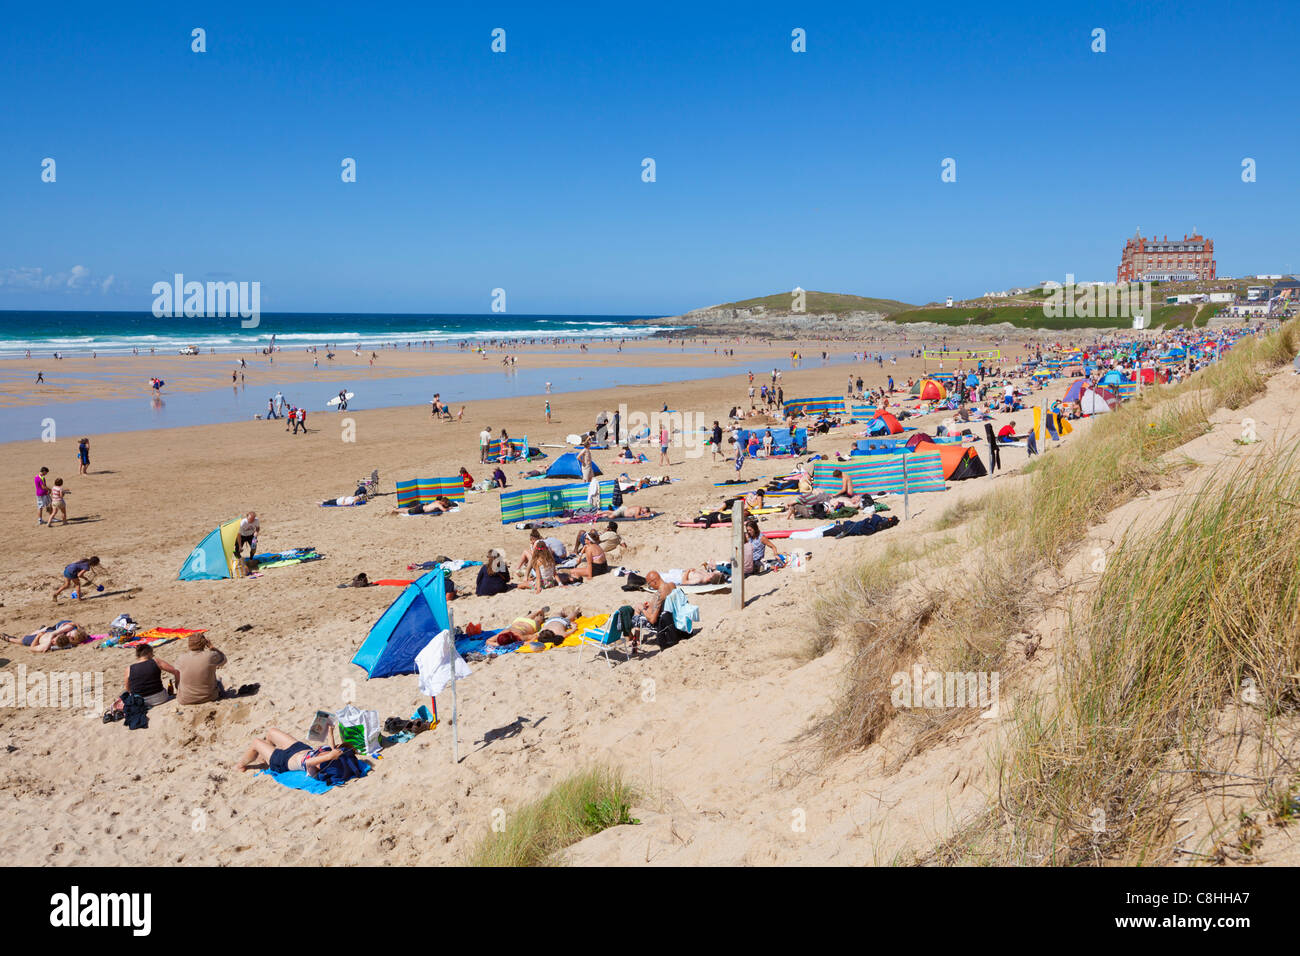 Crowds of Holidaymakers sunbathing on Fistral beach Newquay Cornwall England UK GB EU Europe Stock Photo